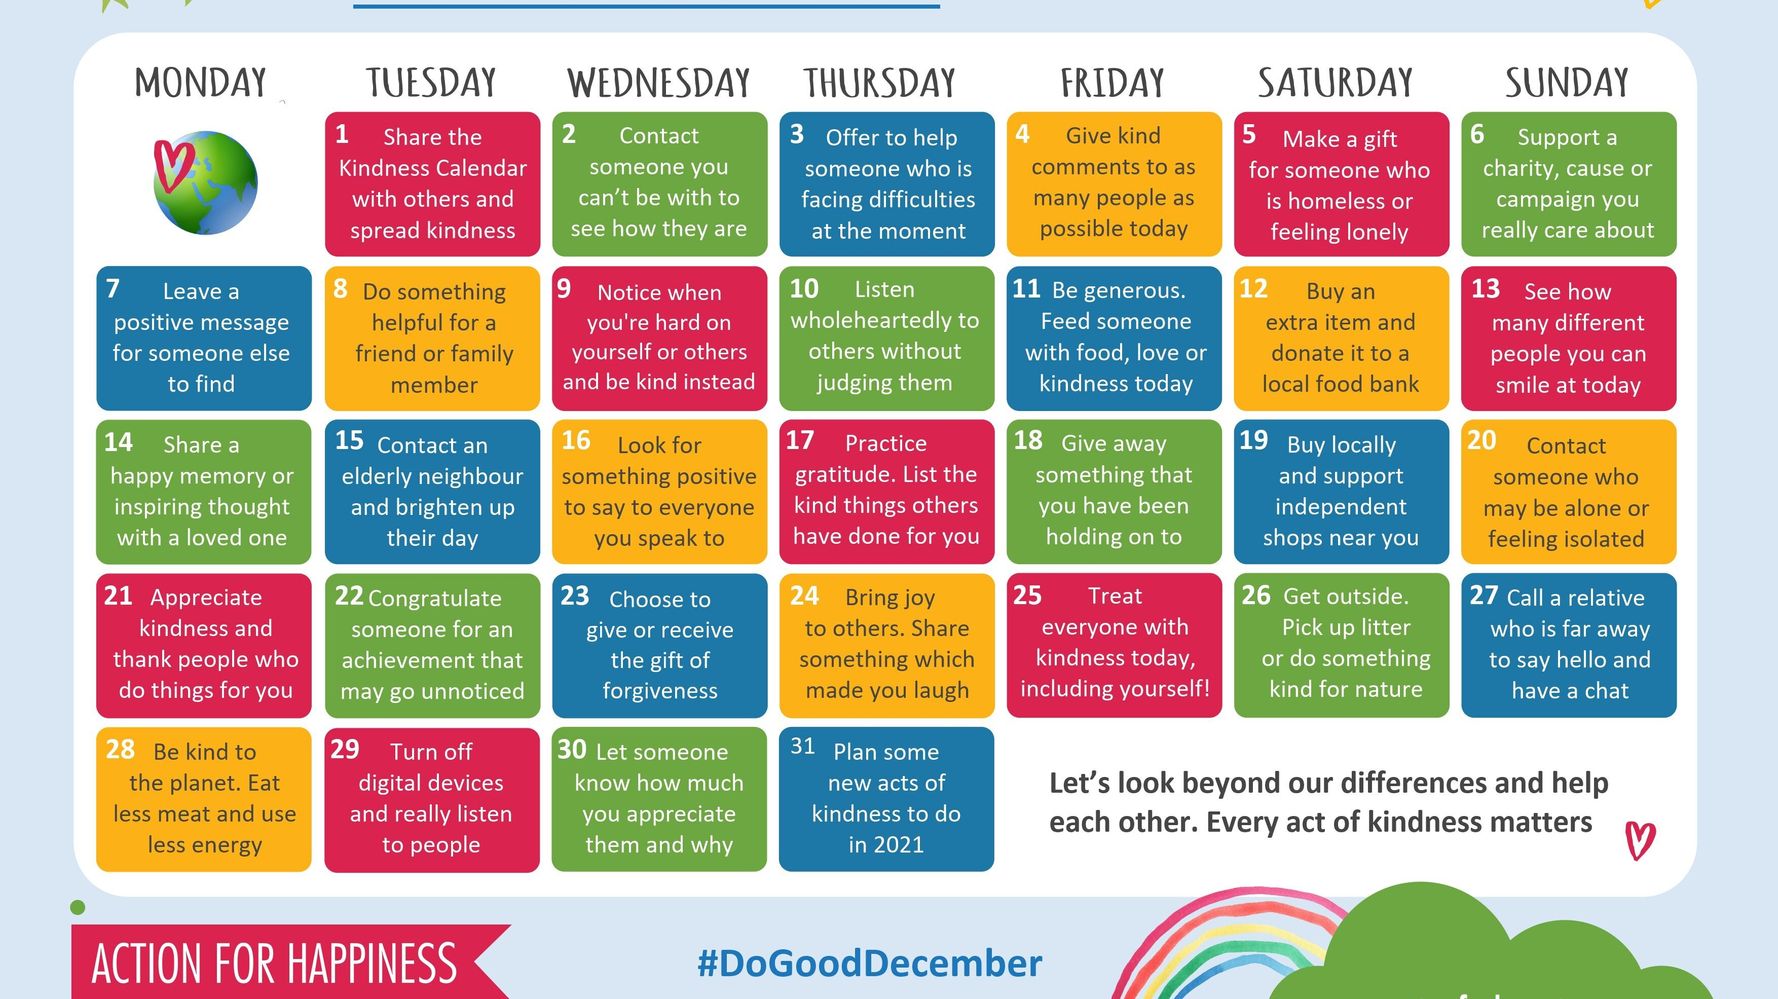 Count Down The Days To Christmas With This Kindness Calendar